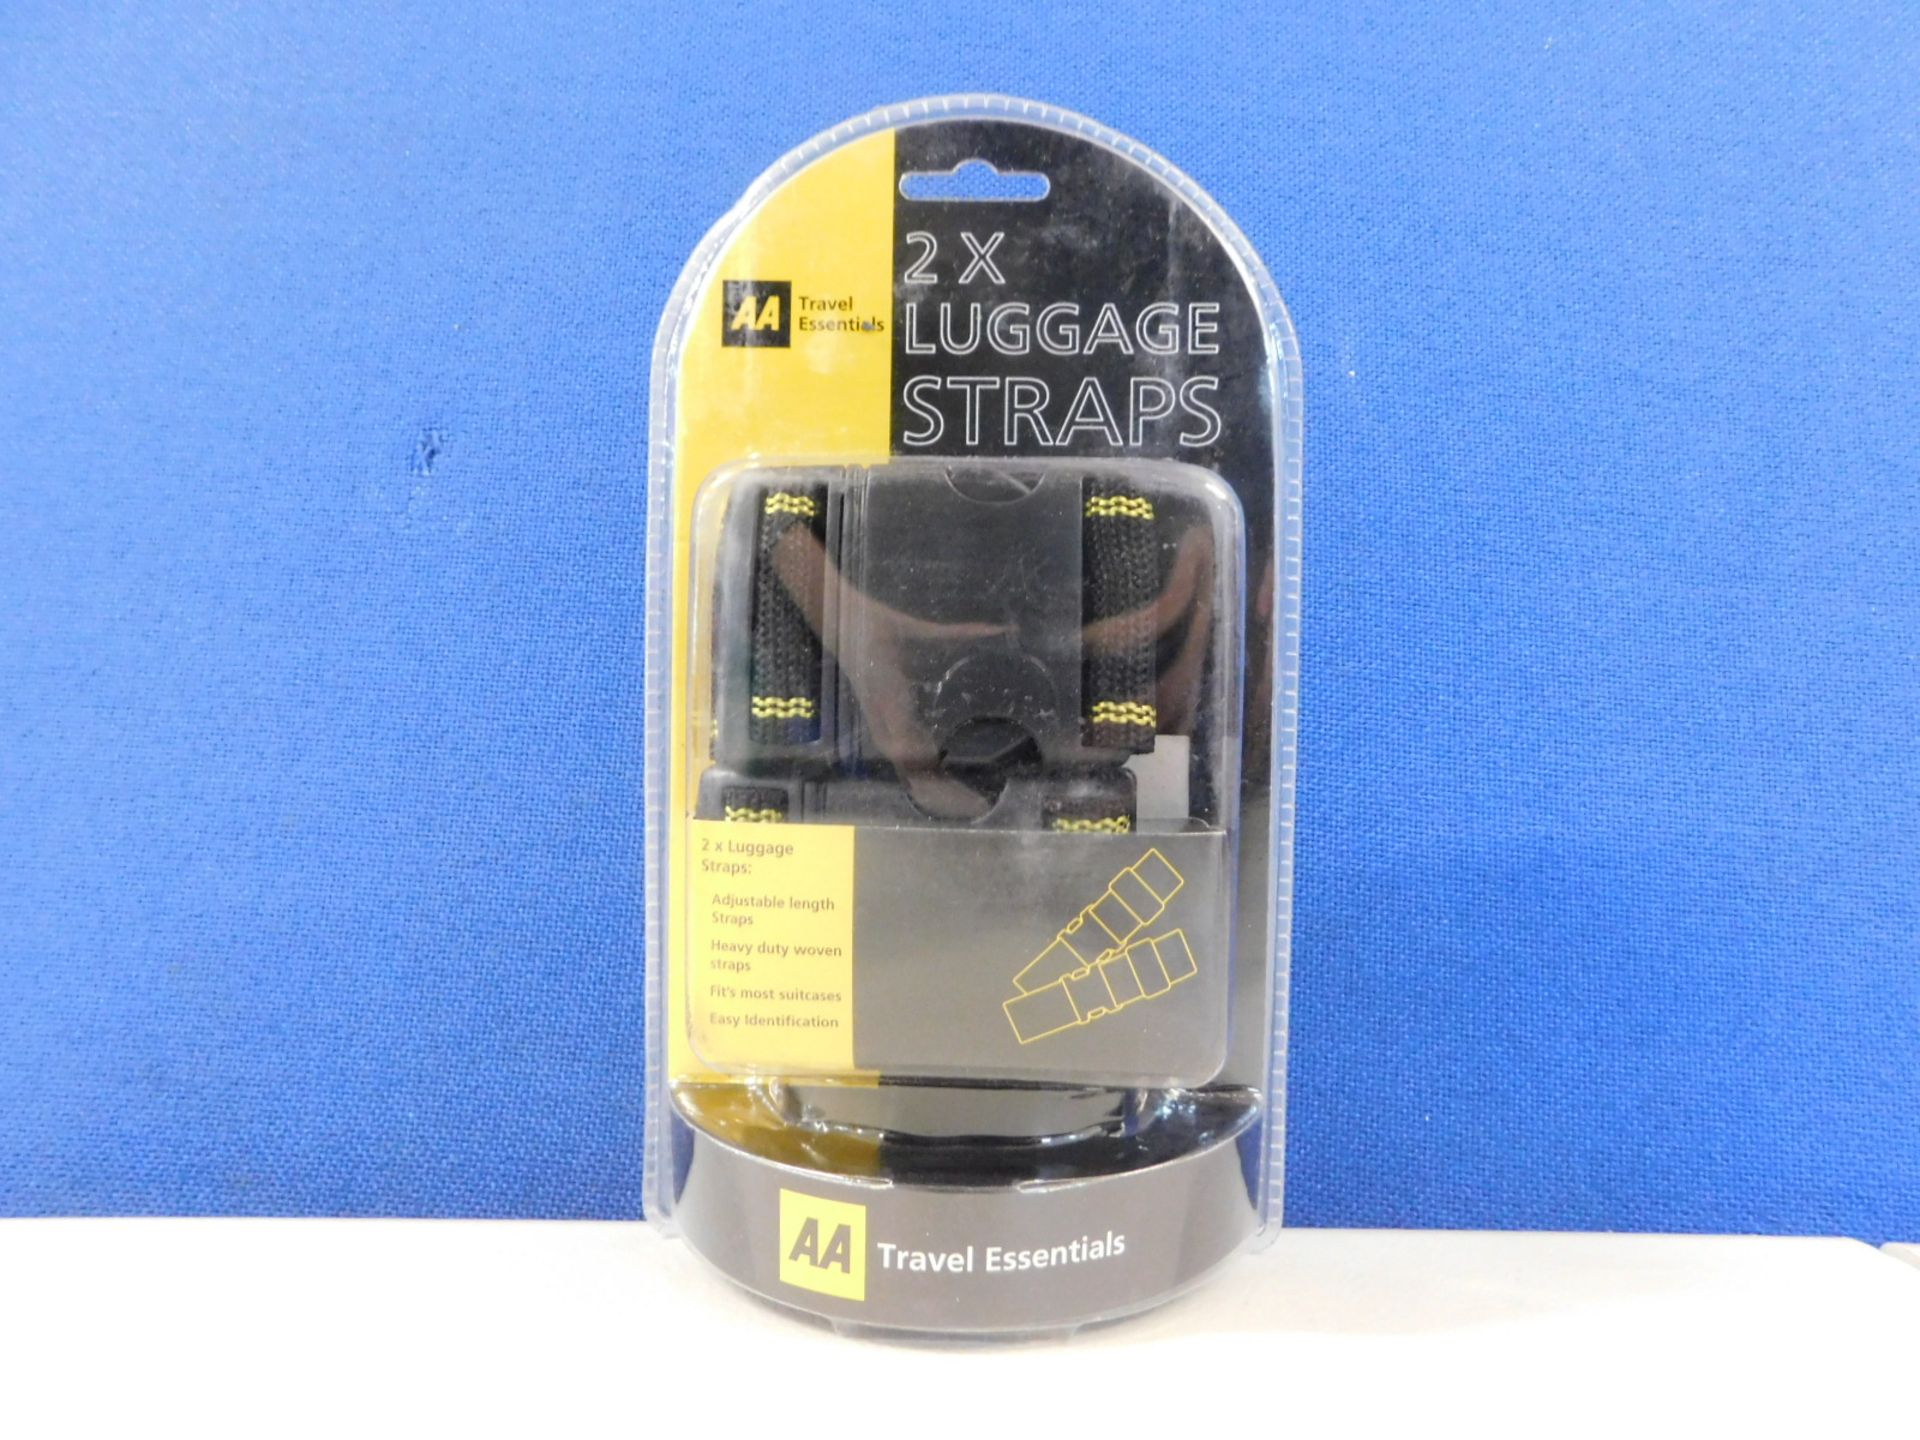 1 BRAND NEW PACKED AA TRAVEL ESSENTIALS PACK OF 2 LUGGAGE STRAPS RRP Â£9